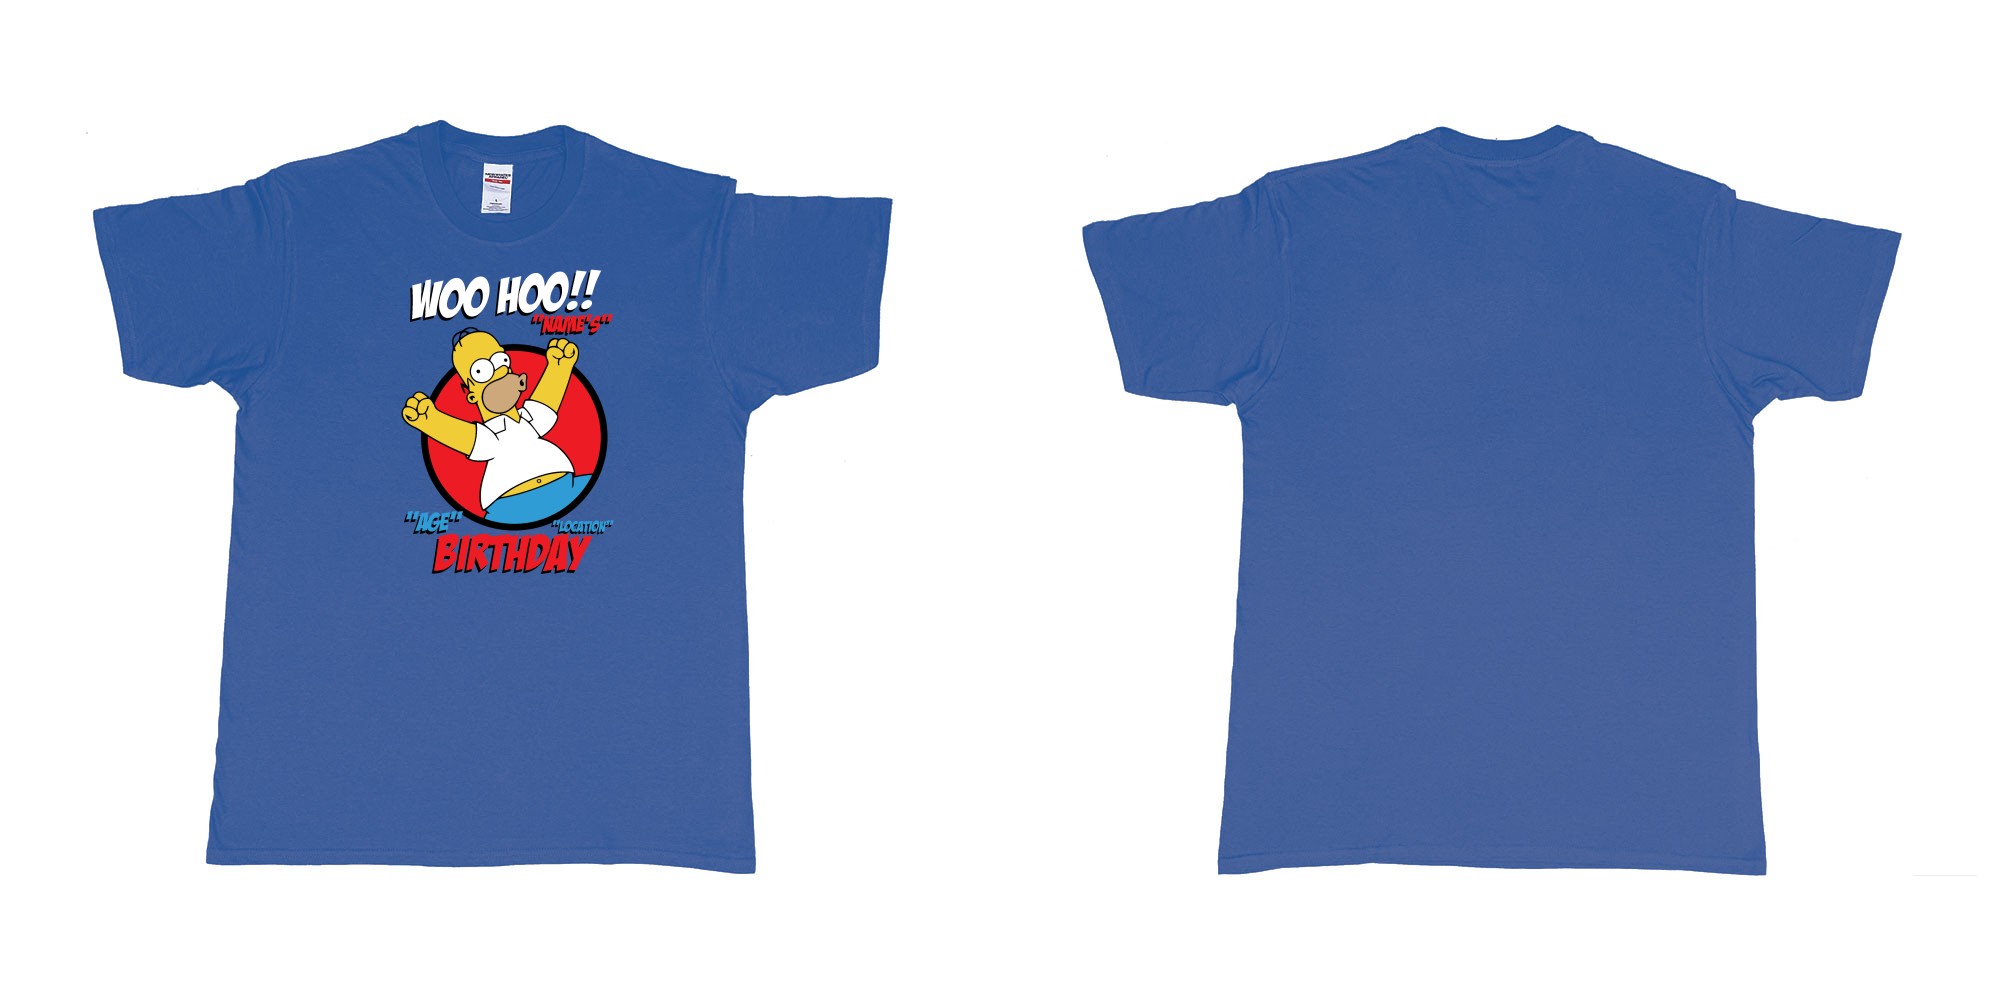 Custom tshirt design homer simpson woo hoo custom age name birthday in fabric color royal-blue choice your own text made in Bali by The Pirate Way